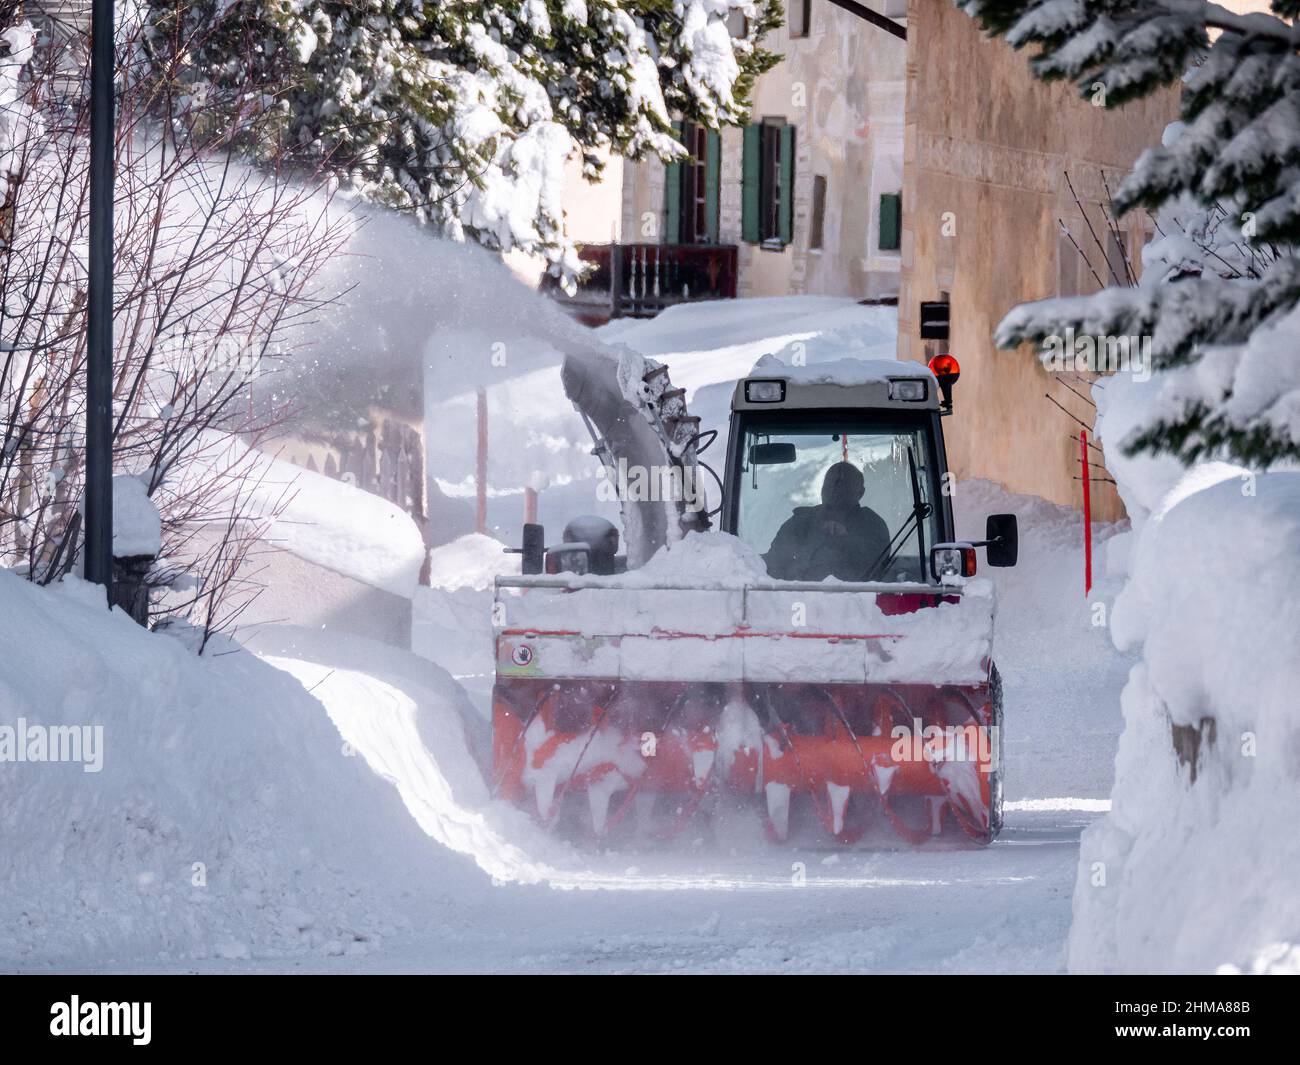 Cinuos-Chel, Switzerland - February 3, 2022: A snow plow vehicle clears a snowy road in the old traditional Swiss village of Cinuos-Chel in Engadine, Stock Photo